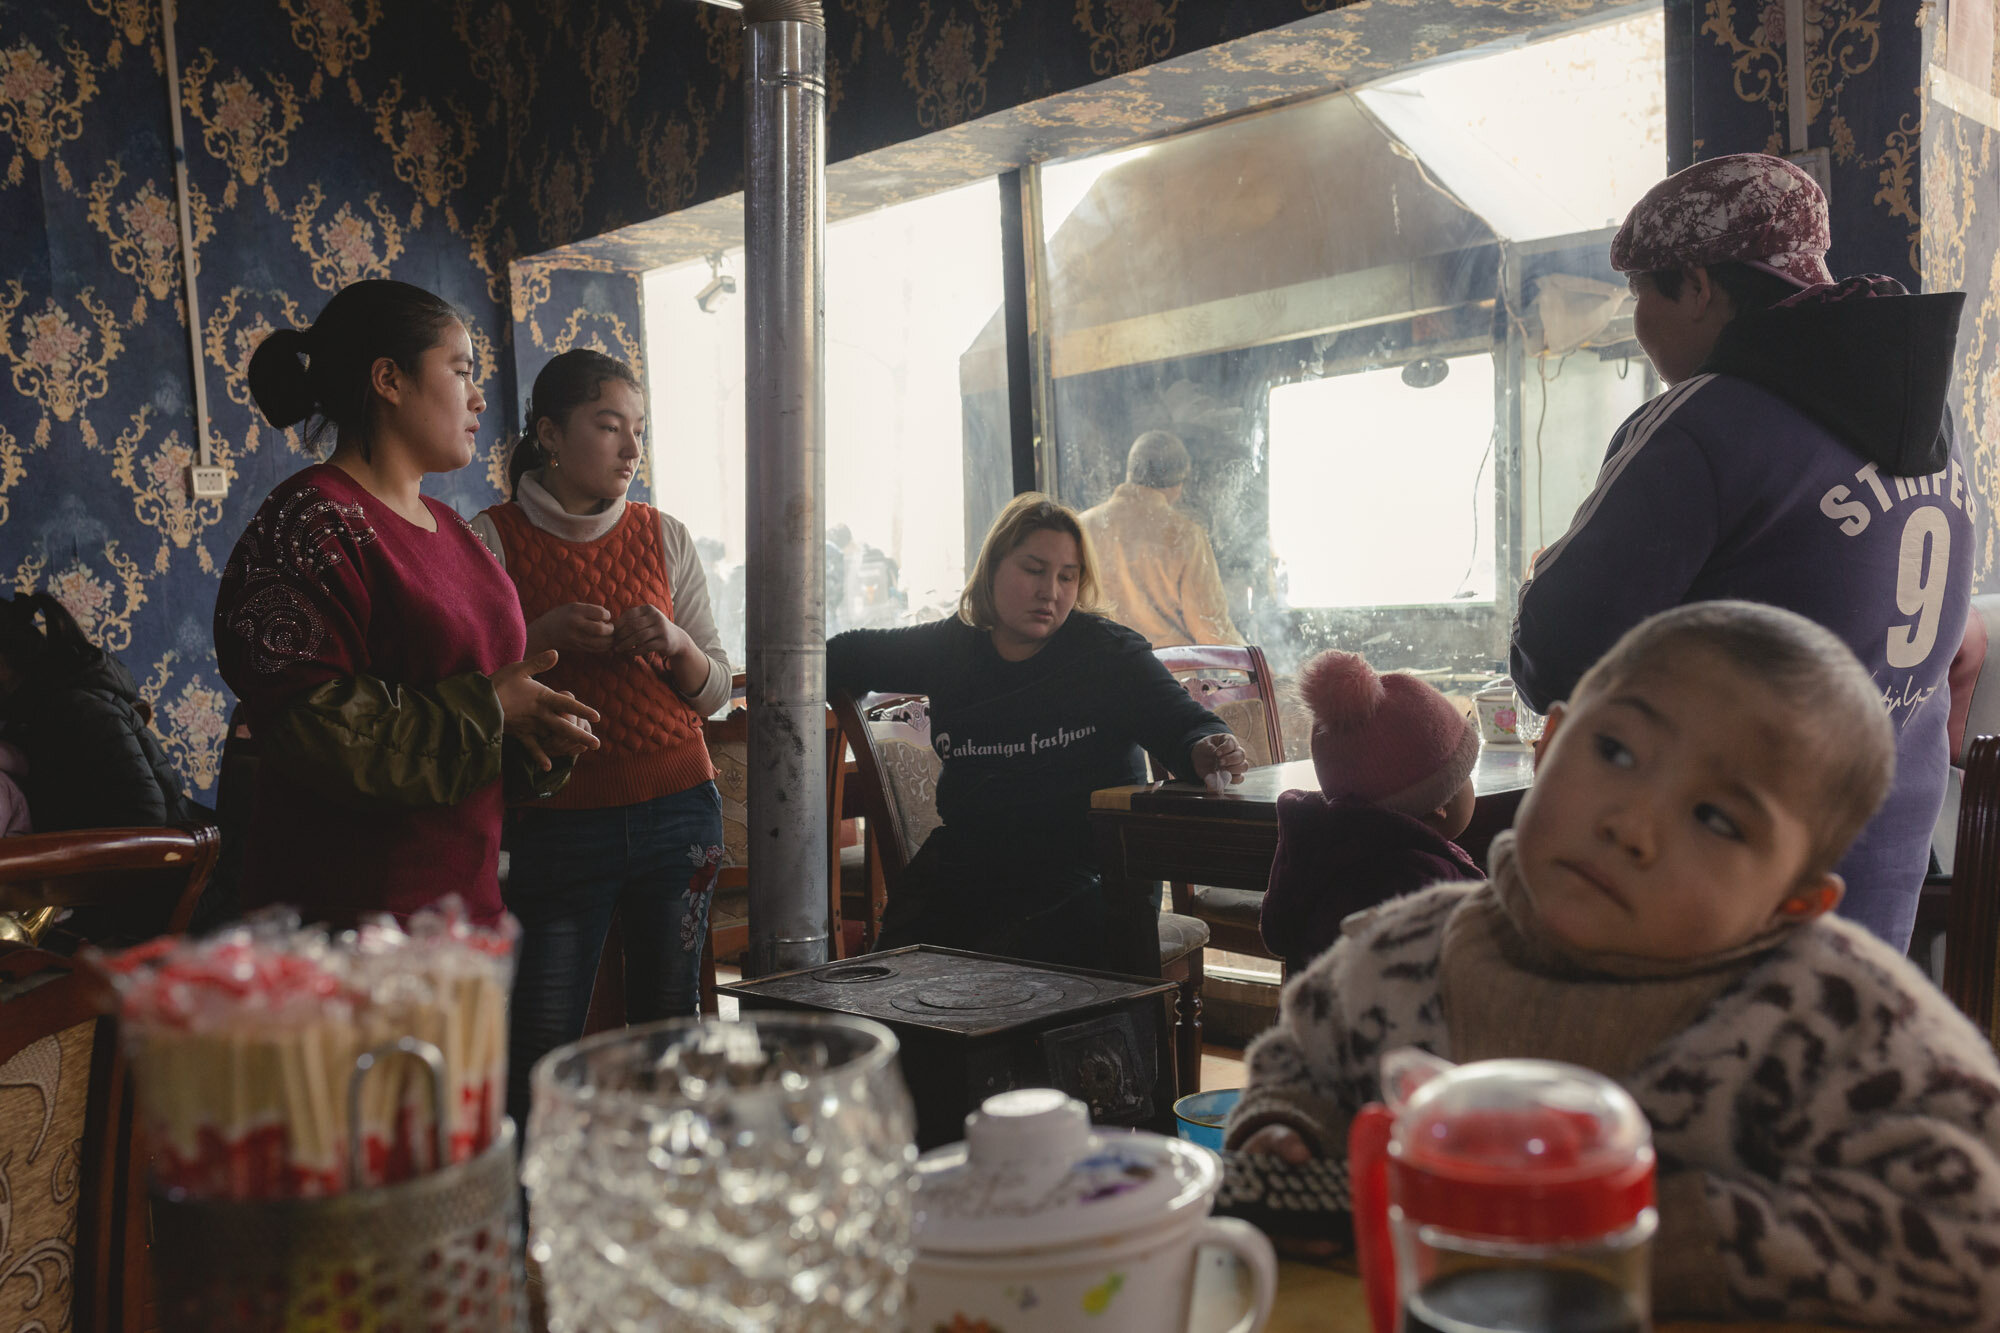  February 3rd 2019. Hotan, Xinjiang province. Uighur-minority restaurant staff and patrons with their children in a Uighur restaurant in the old twon of Hotan. 